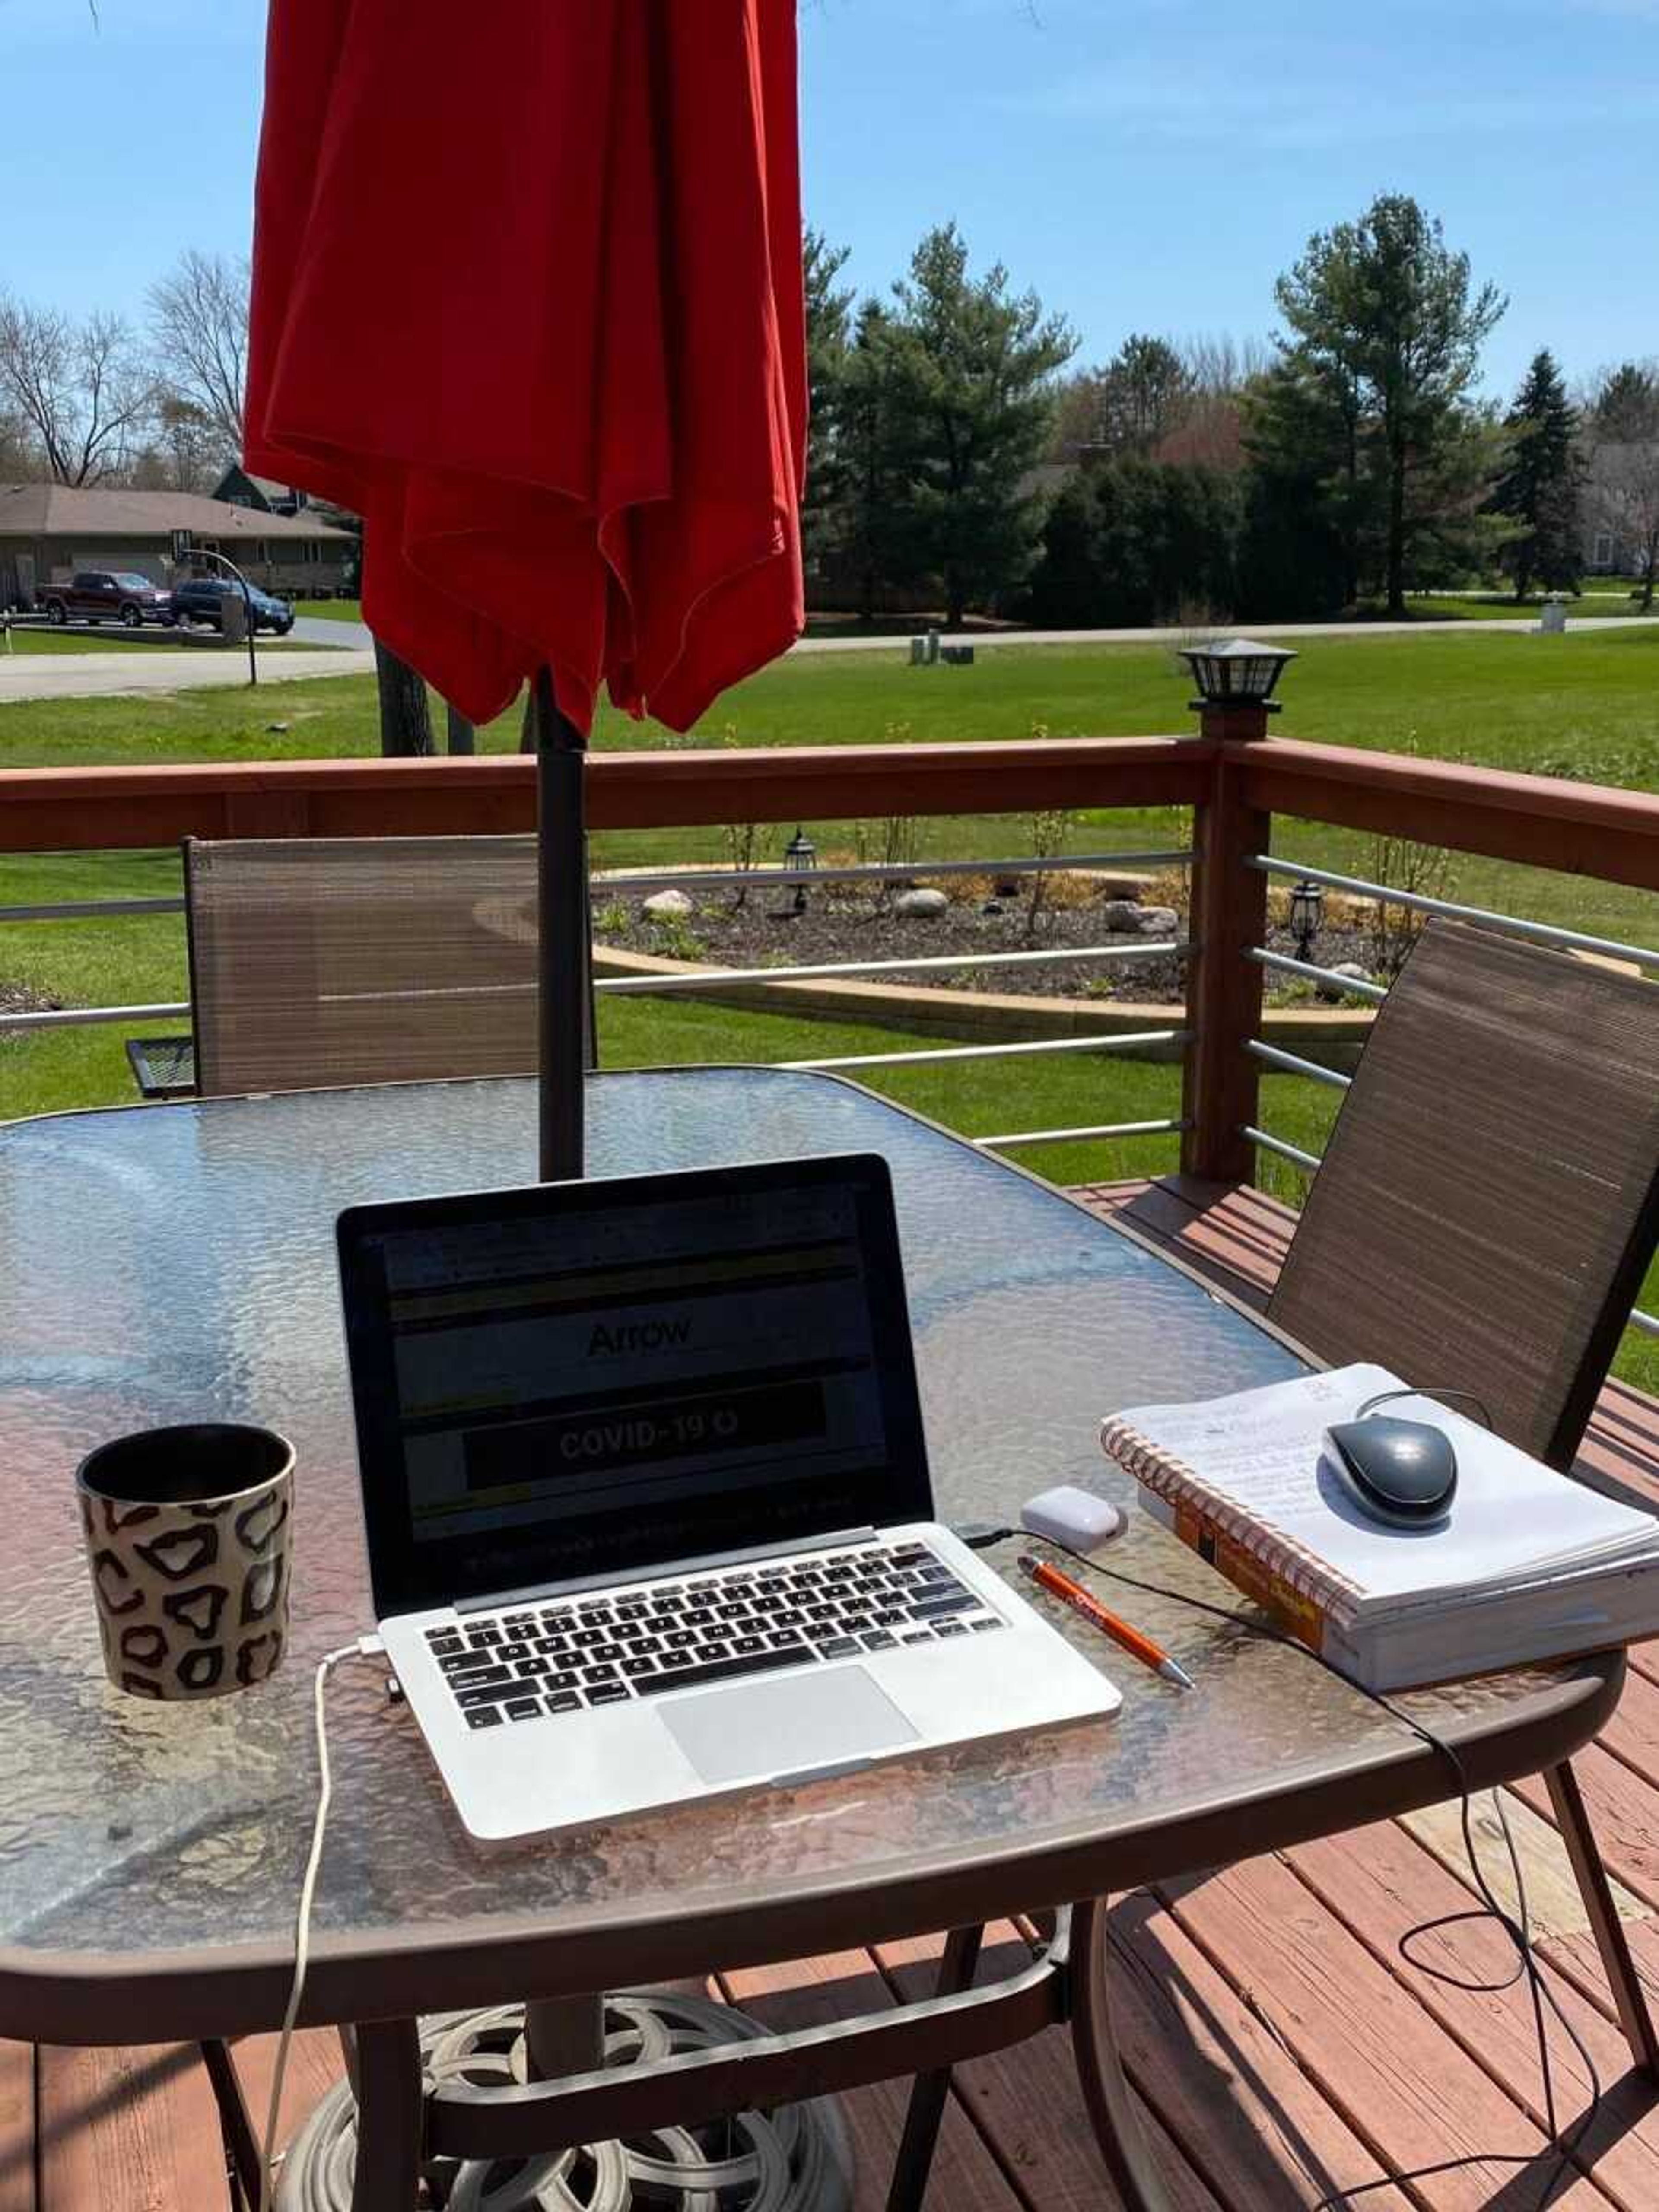 Samantha Wakitsch works from the back porch on Monday, April 20 in Johnsburg, Illinois.